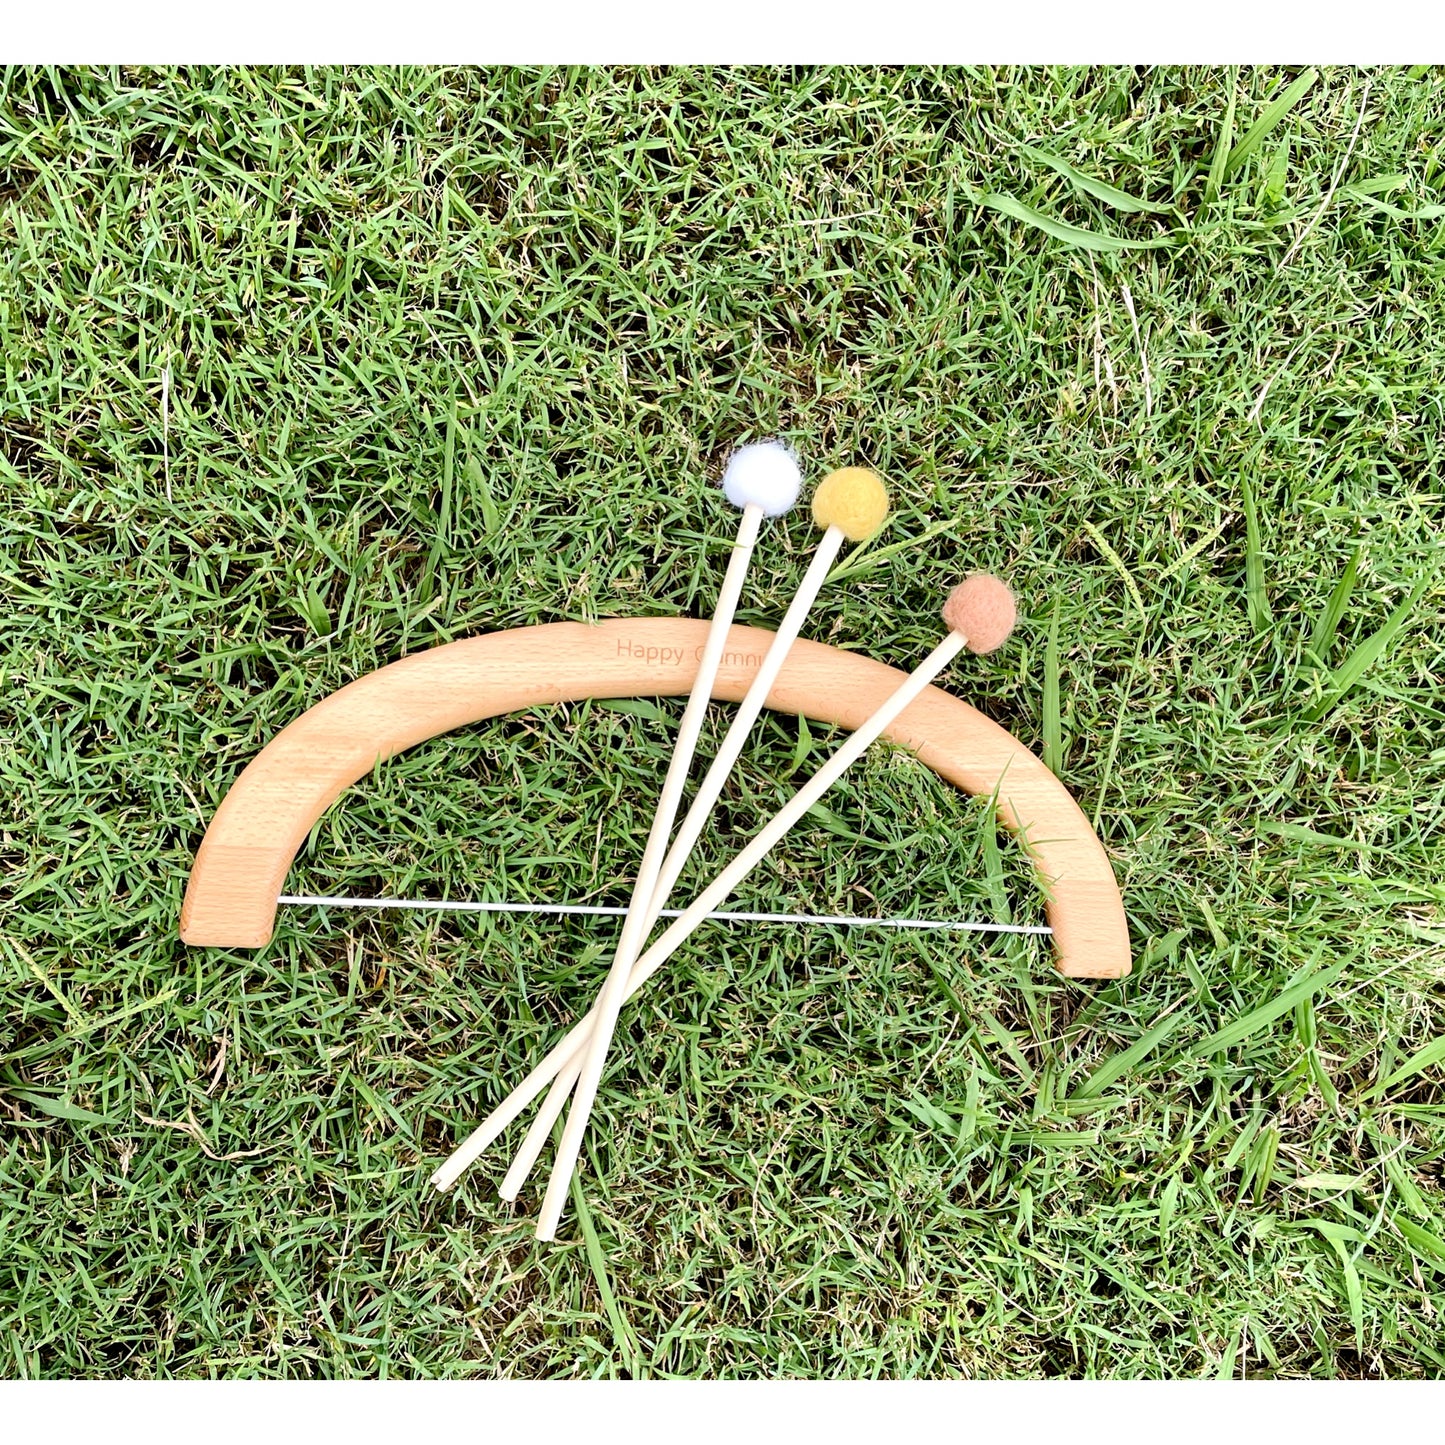 Wooden Bow and Arrow Set Safe tips Kids Toy - HAPPY GUMNUT